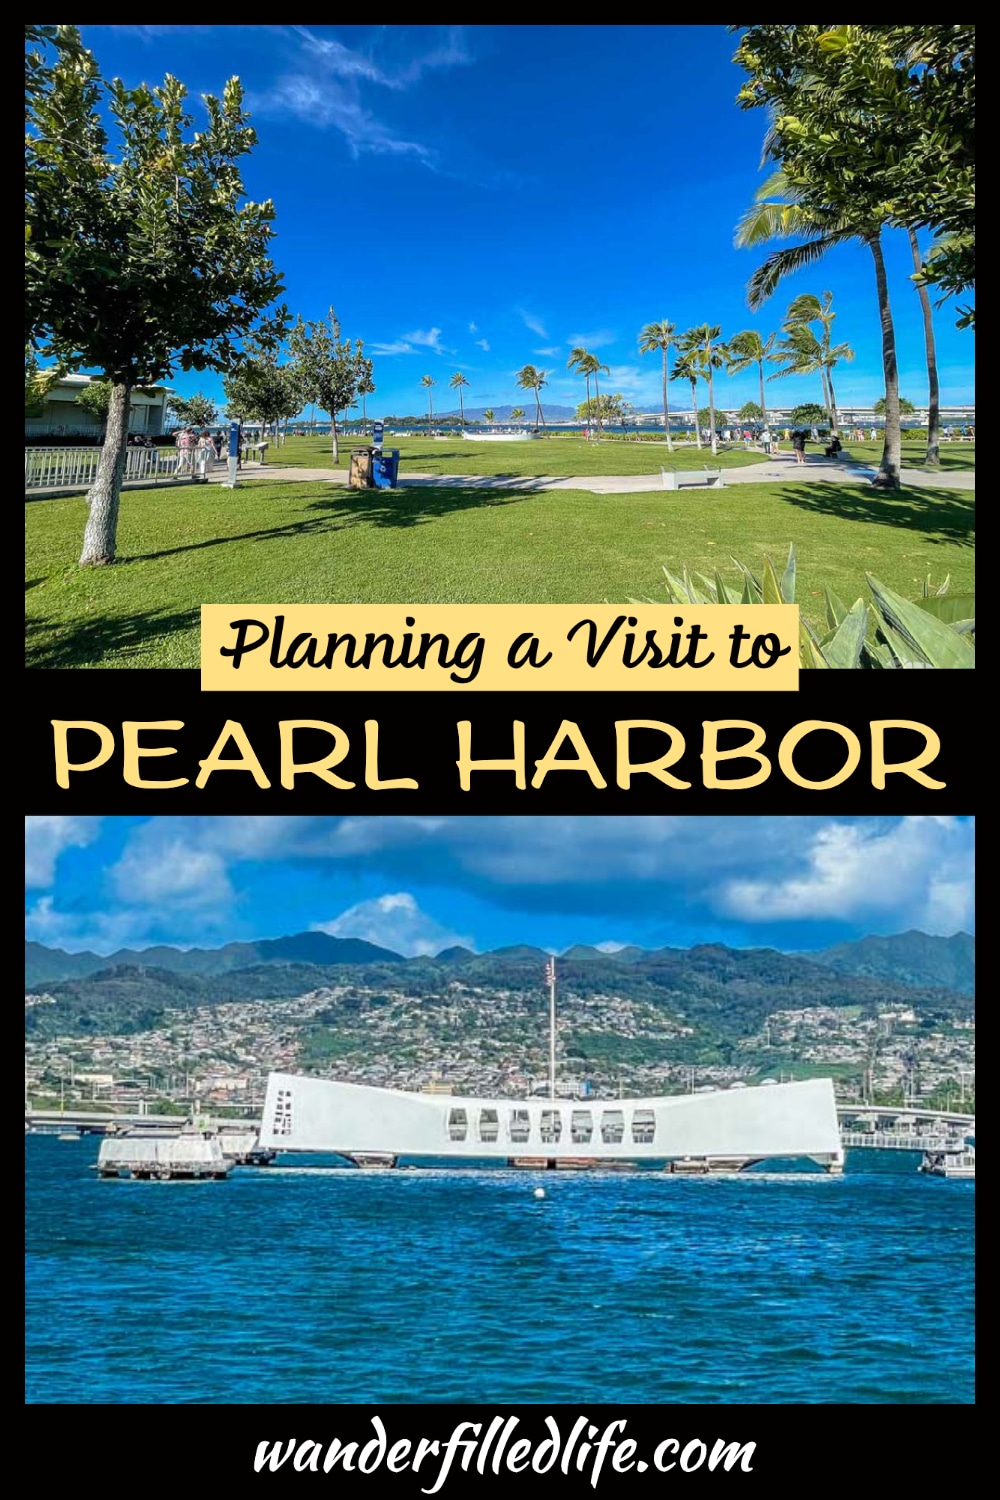 Visiting Pearl Harbor National Memorial is truly an experience not to be missed but it does take a little planning to do right.